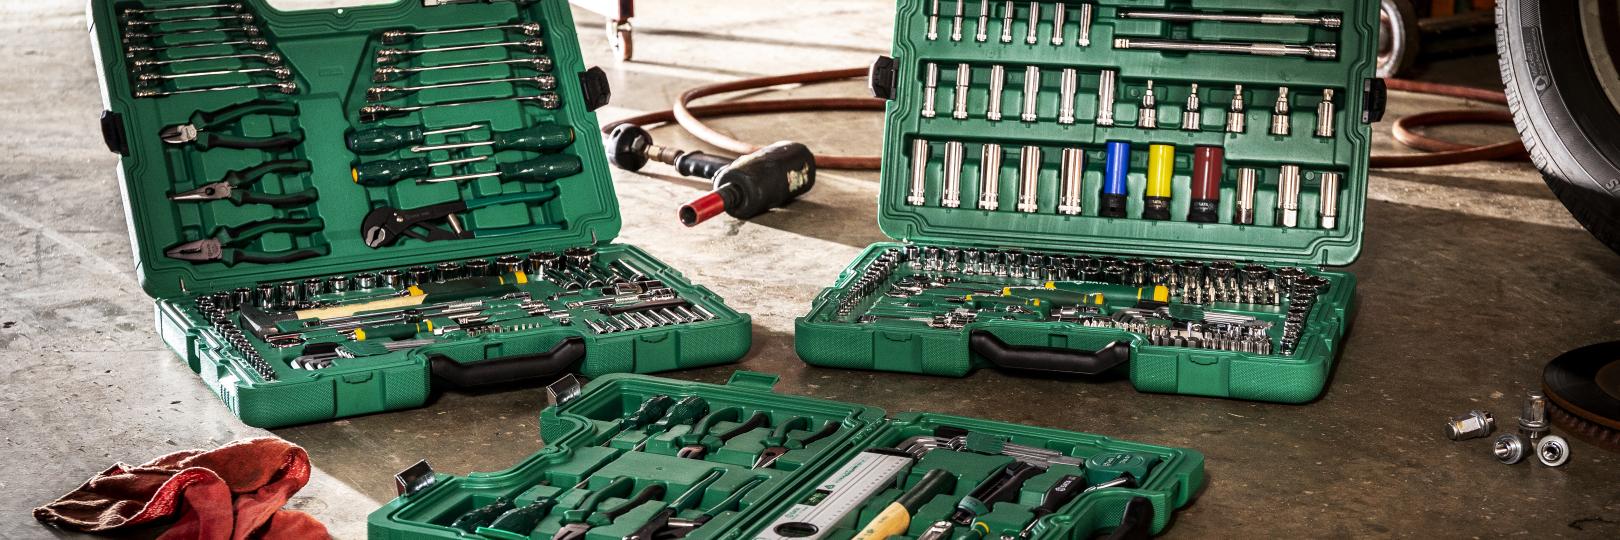 Tool Up: Tool Sets for every job. | SATA